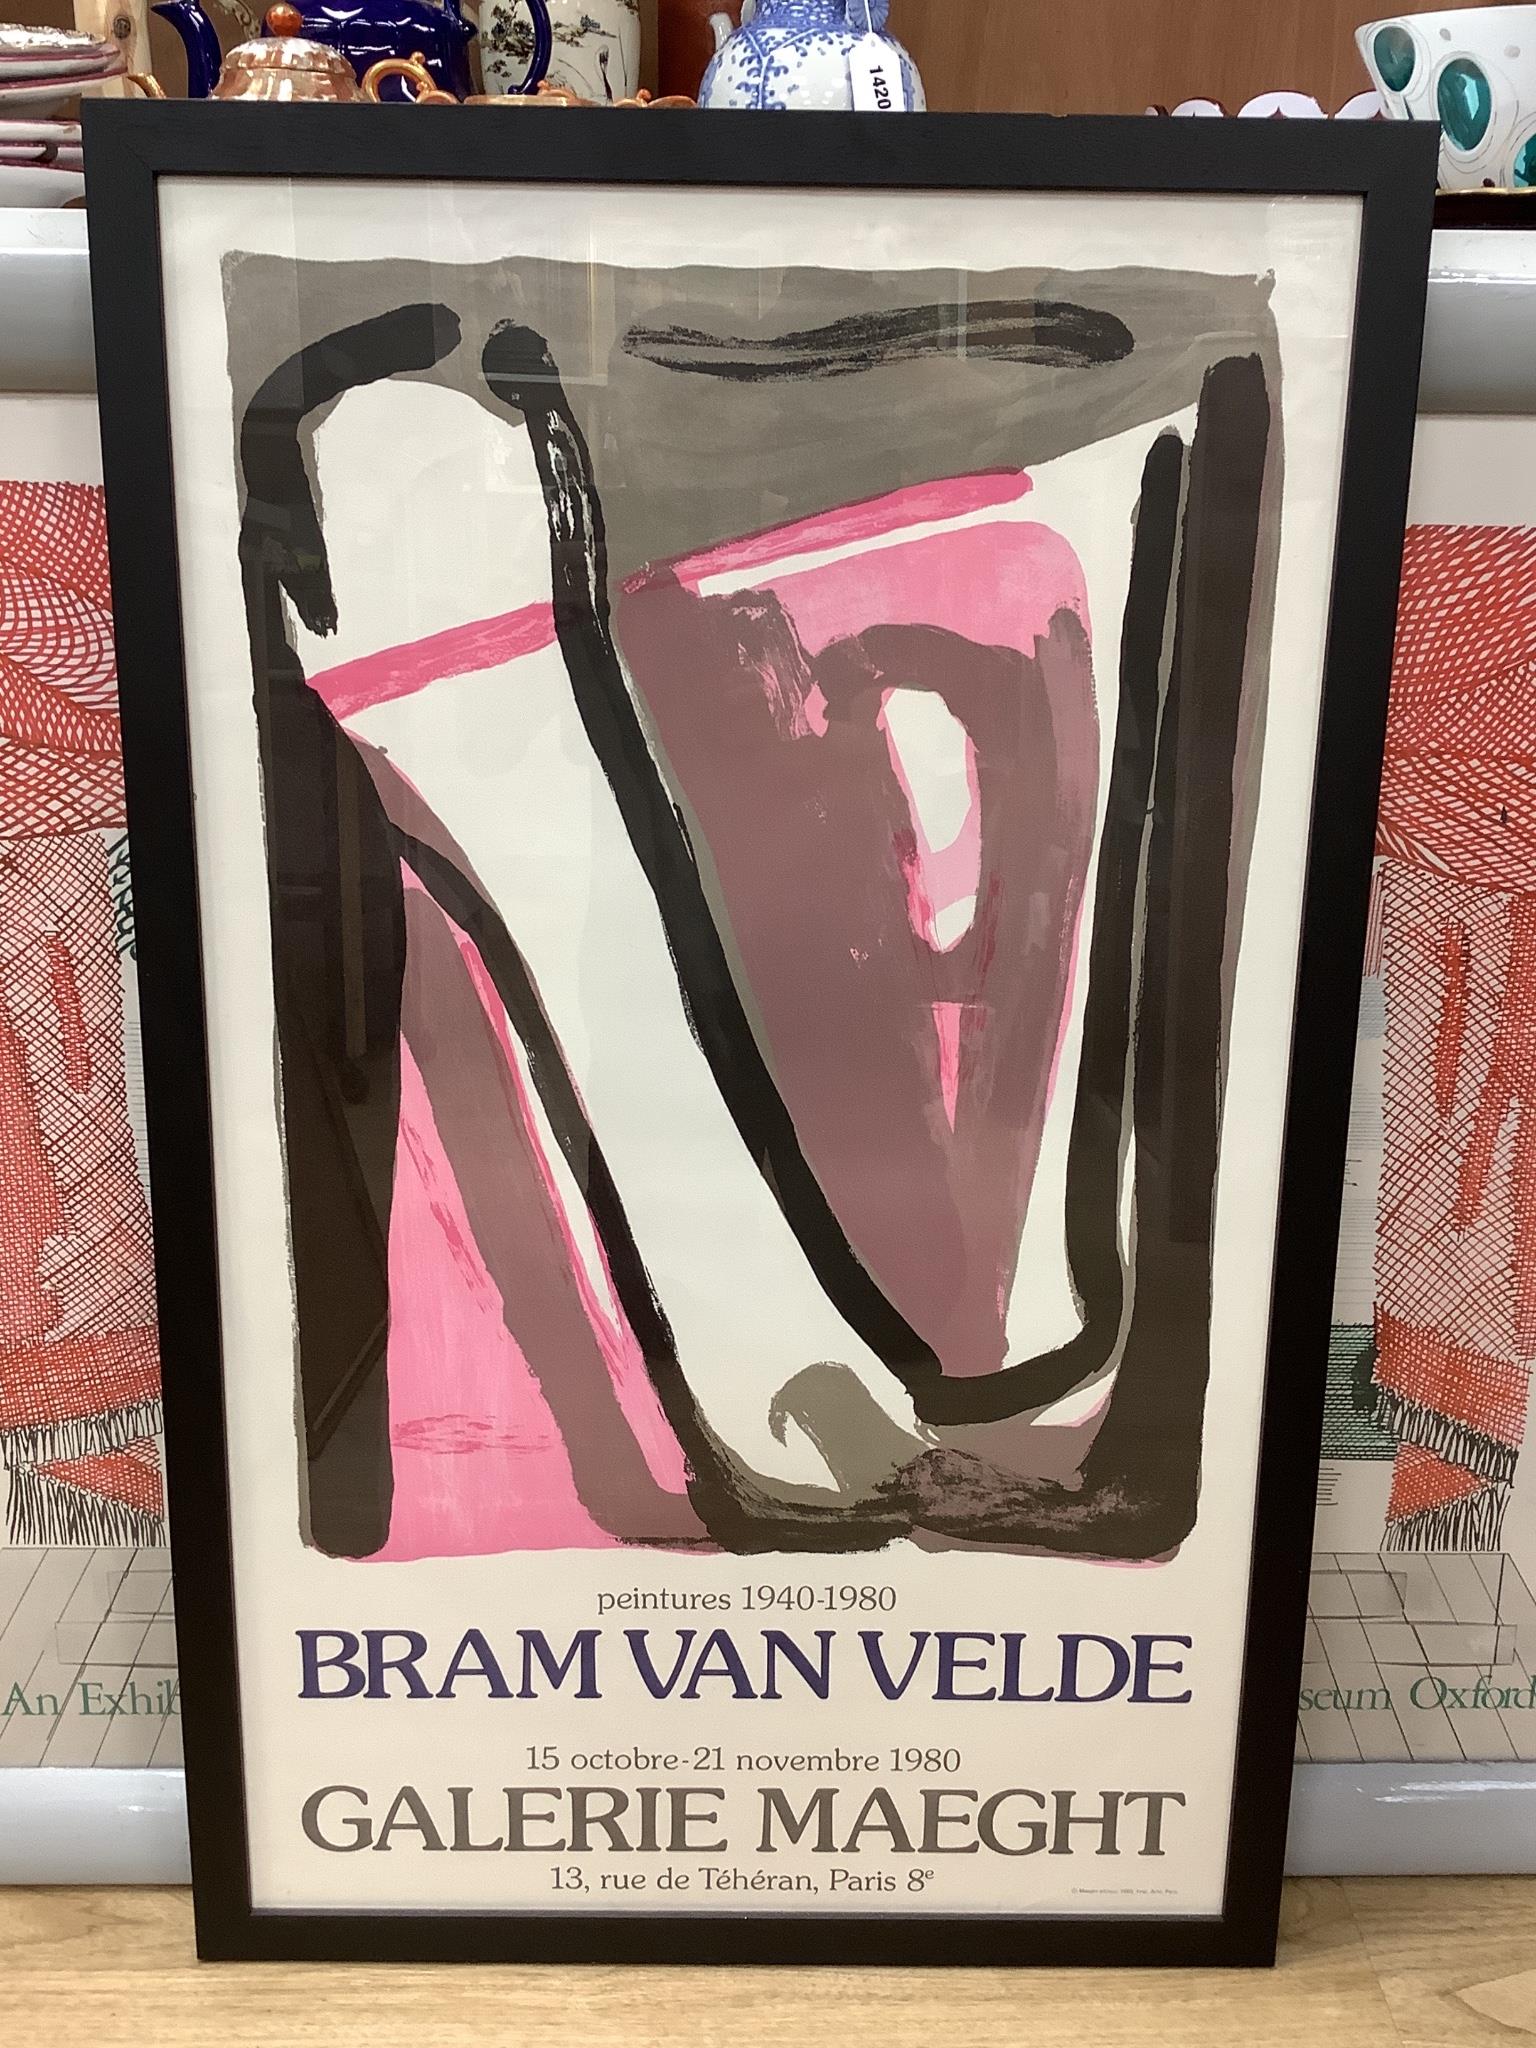 After David Hockney, Ashmolean Museum lithographic poster and a Bram Van Velde gallery lithographic poster 75x94cm & 67x52.5cm